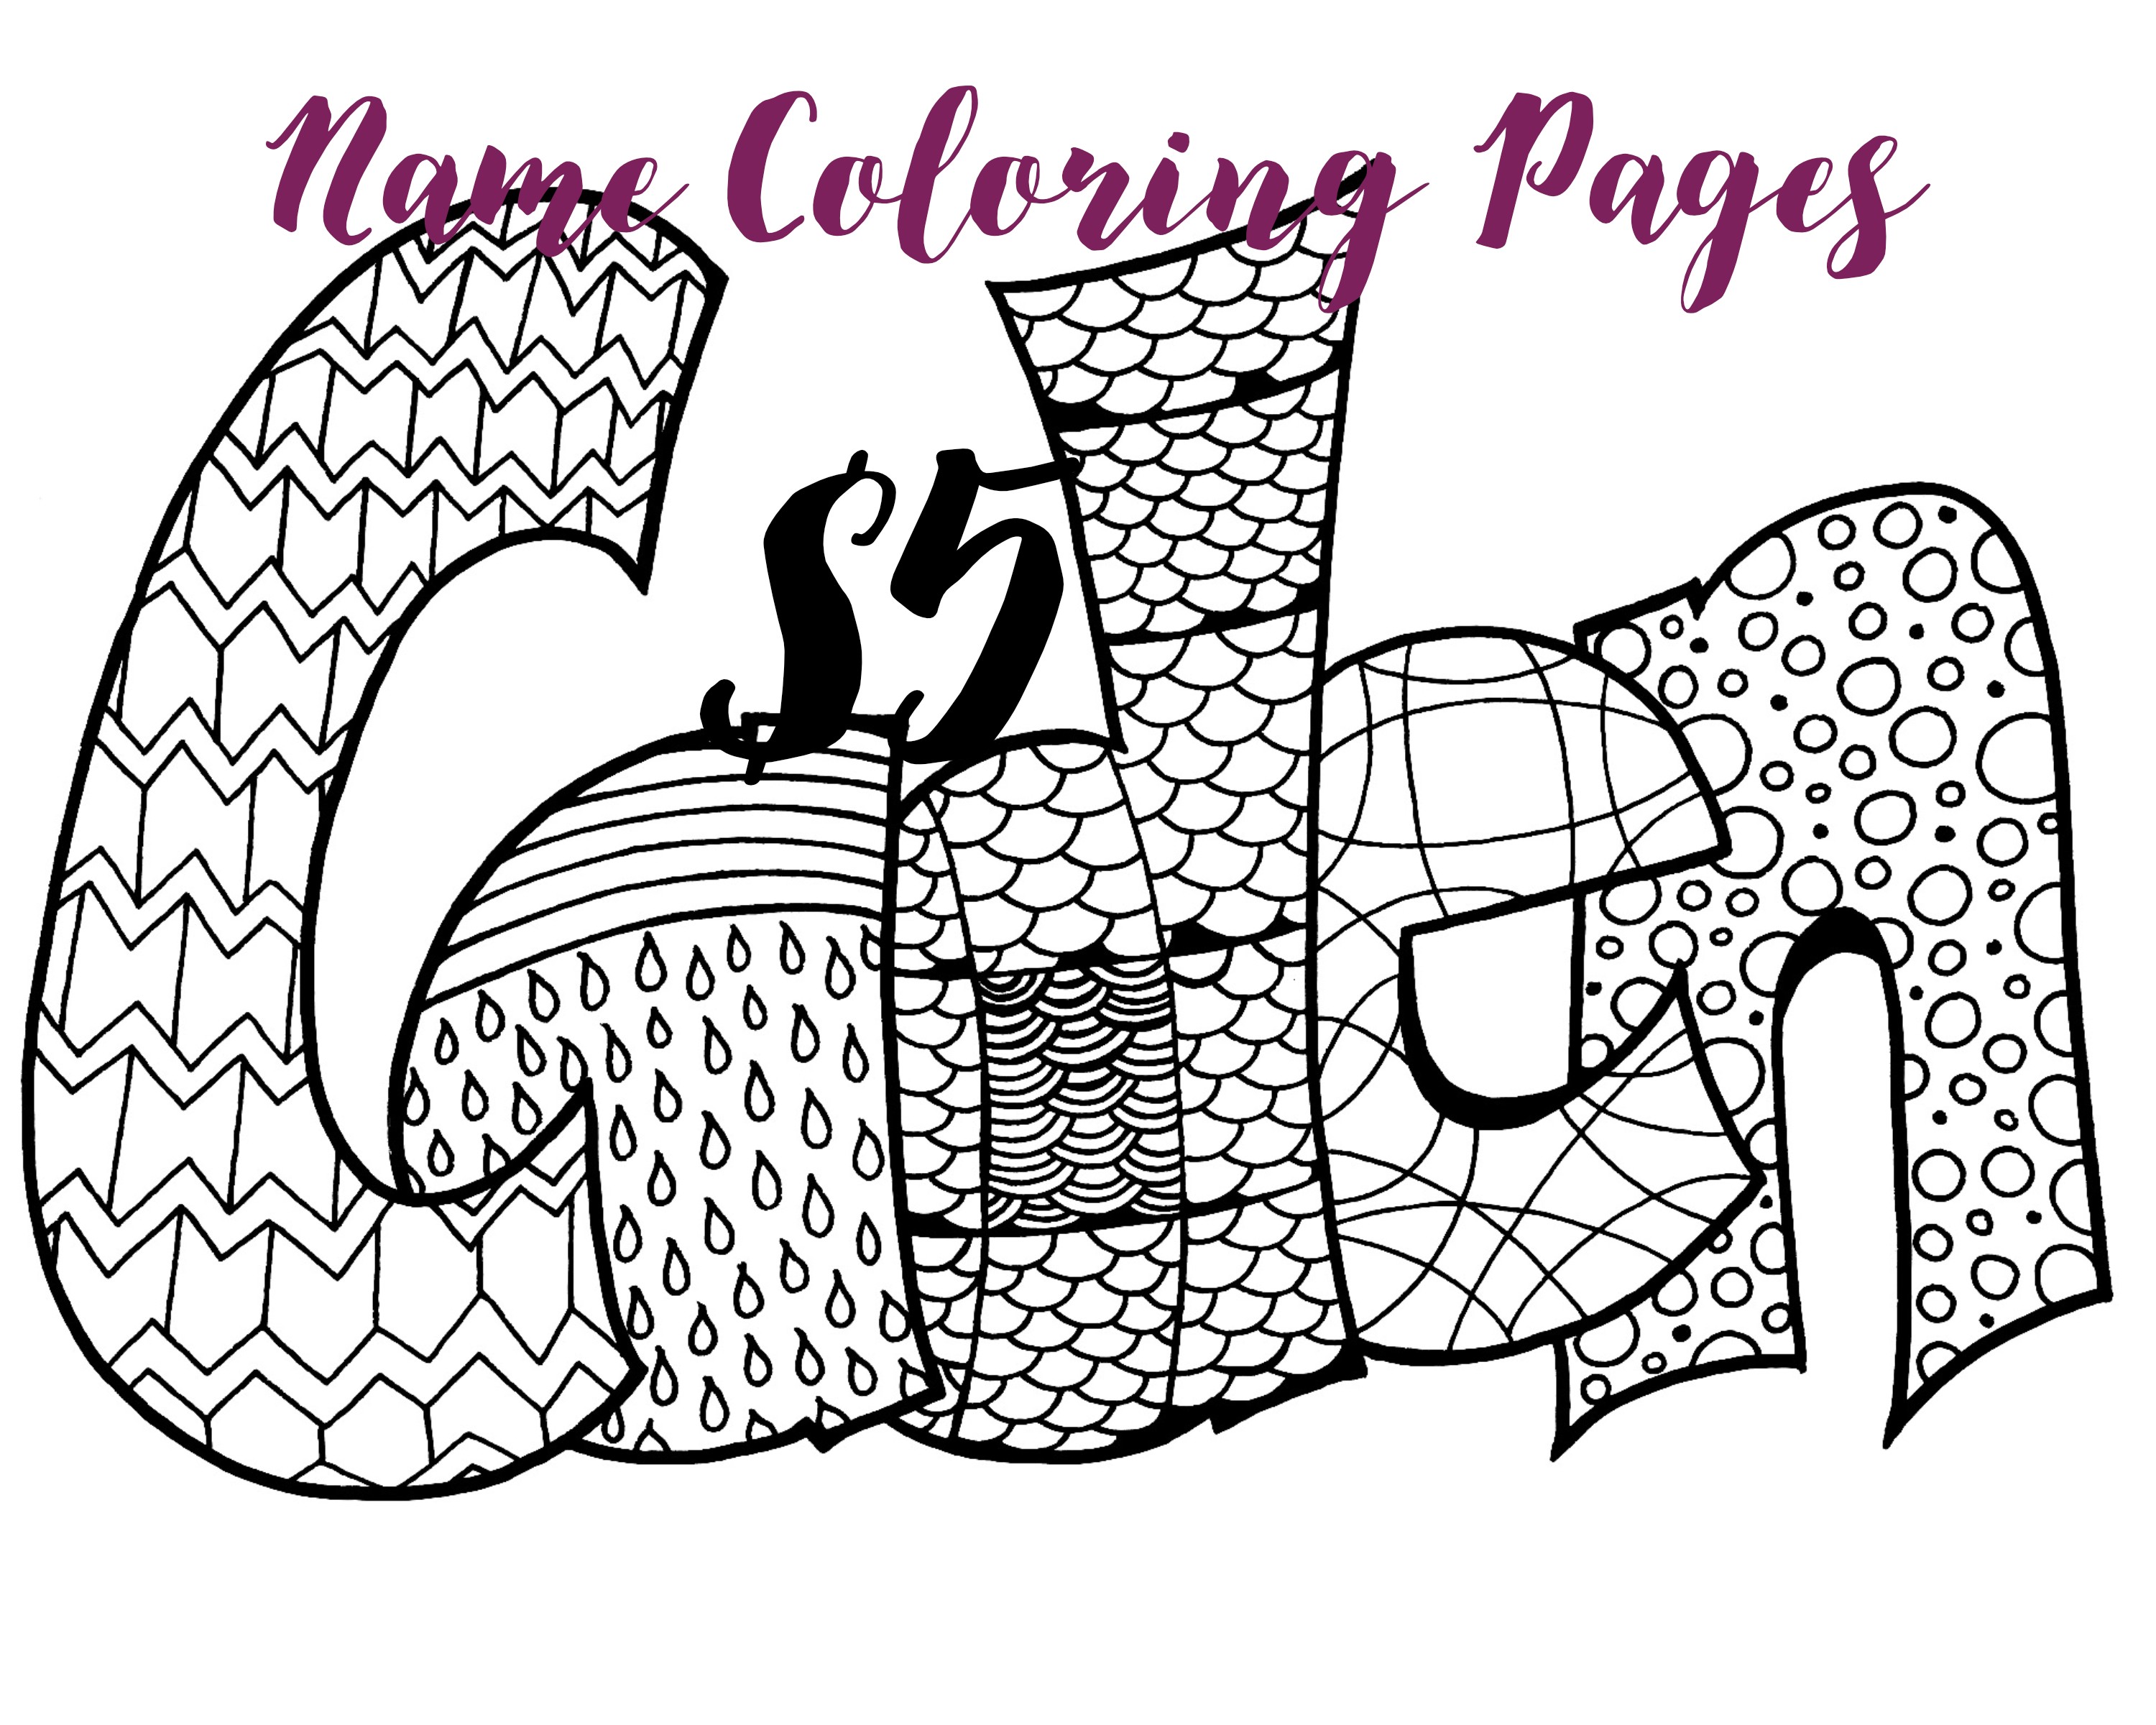 Personalized Name Coloring Pages at Free printable